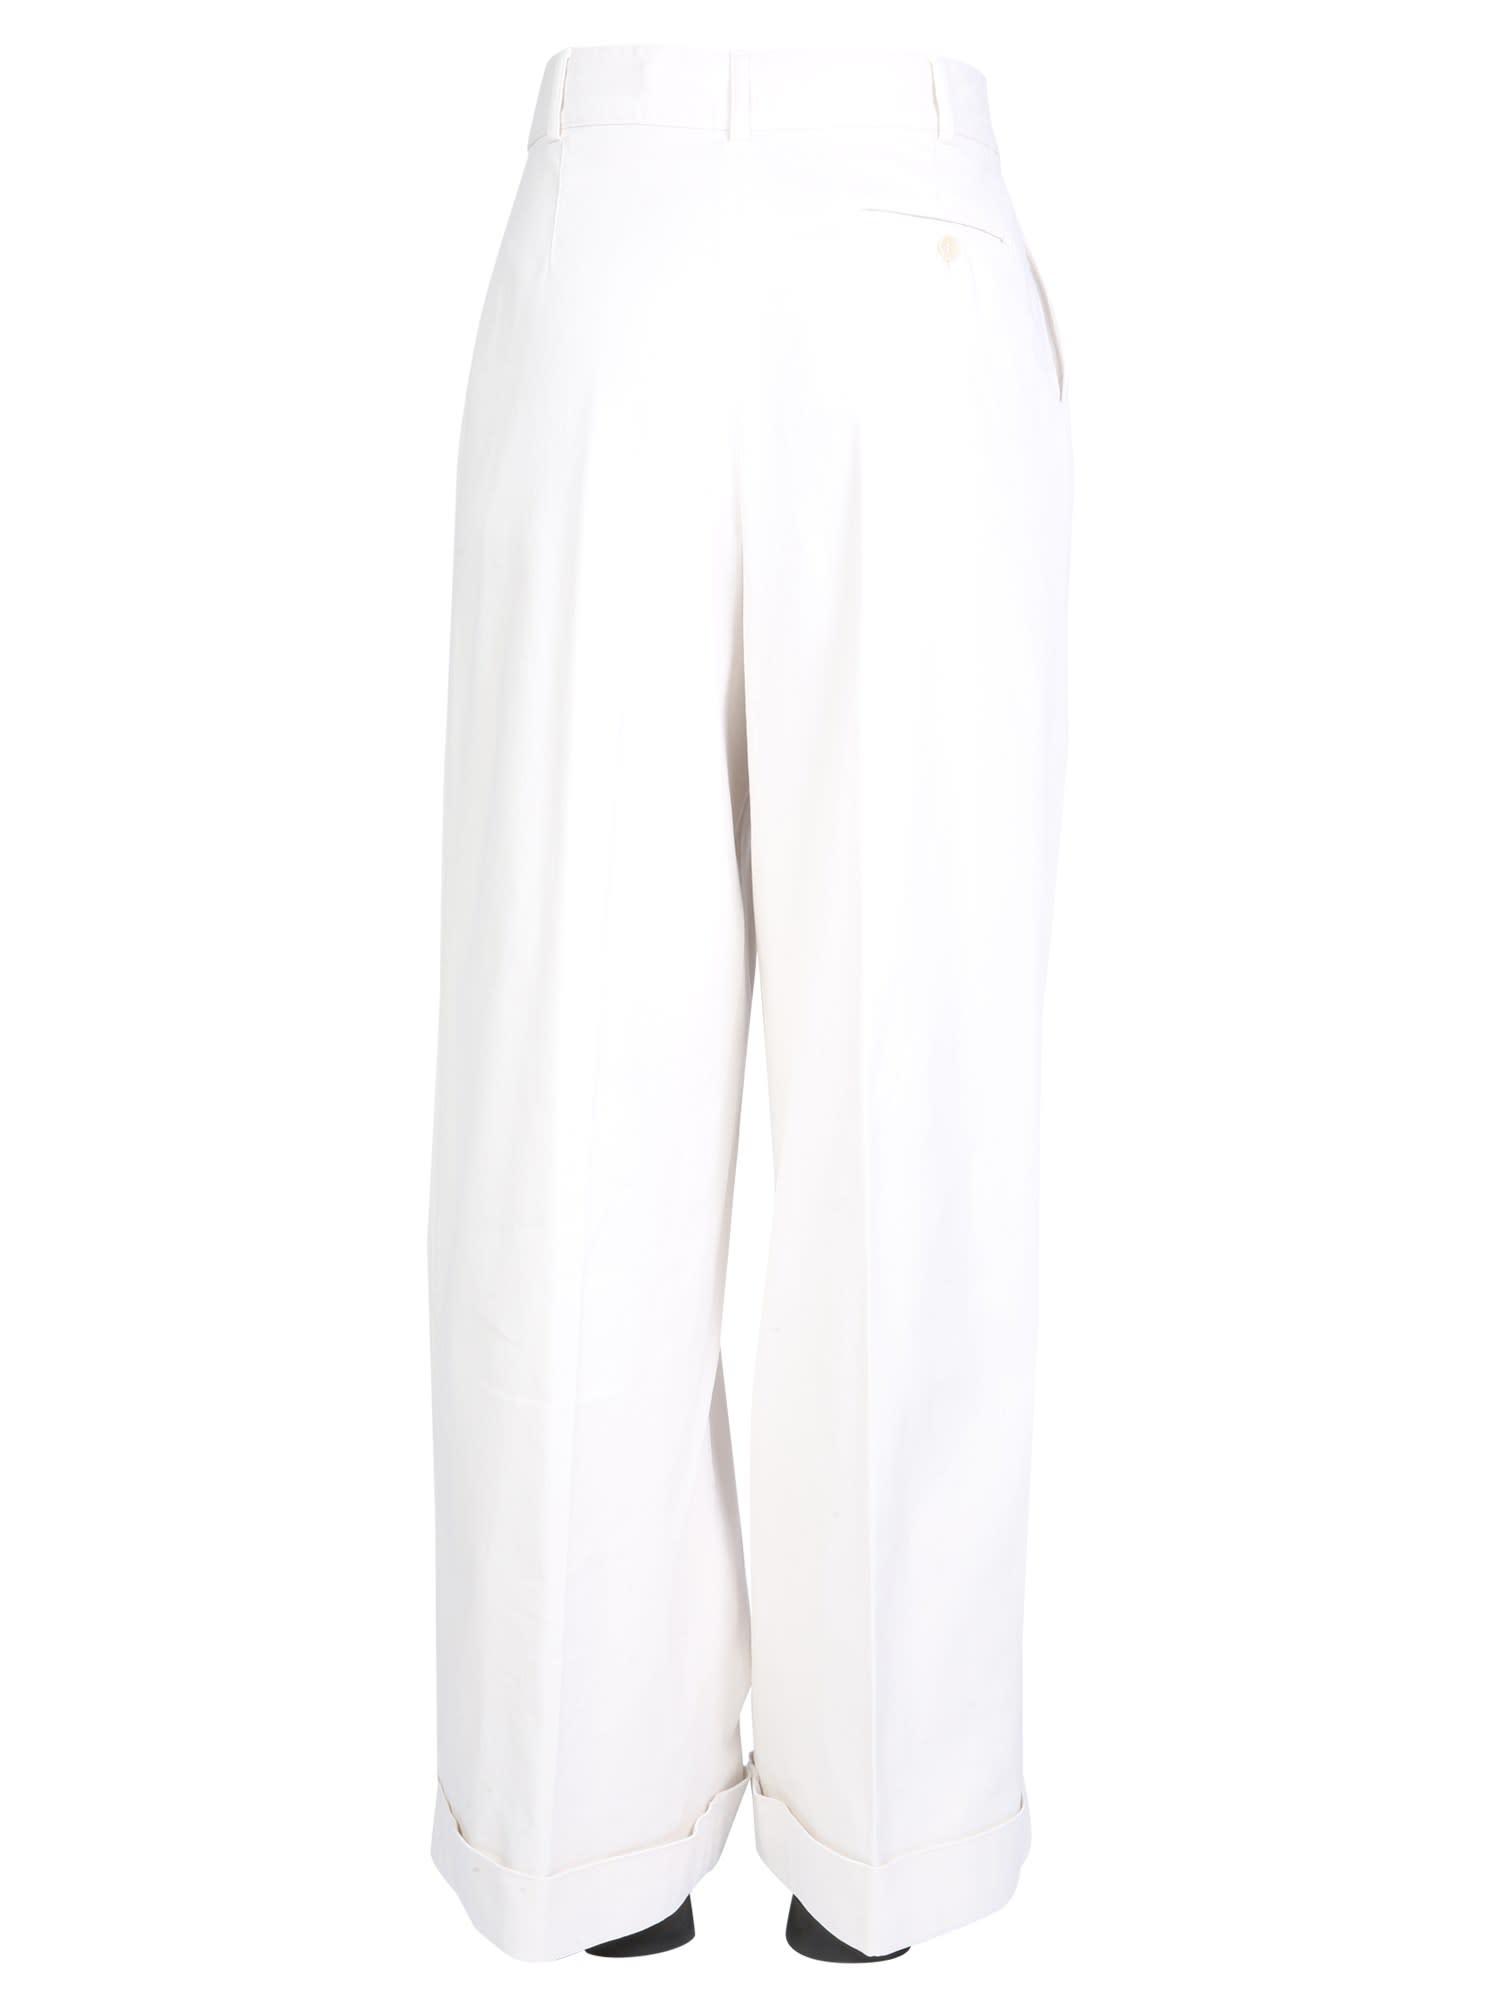 Womens Trousers Aspesi Cotton Wide Leg Pants in White Slacks and Chinos Slacks and Chinos Aspesi Trousers Save 10% 